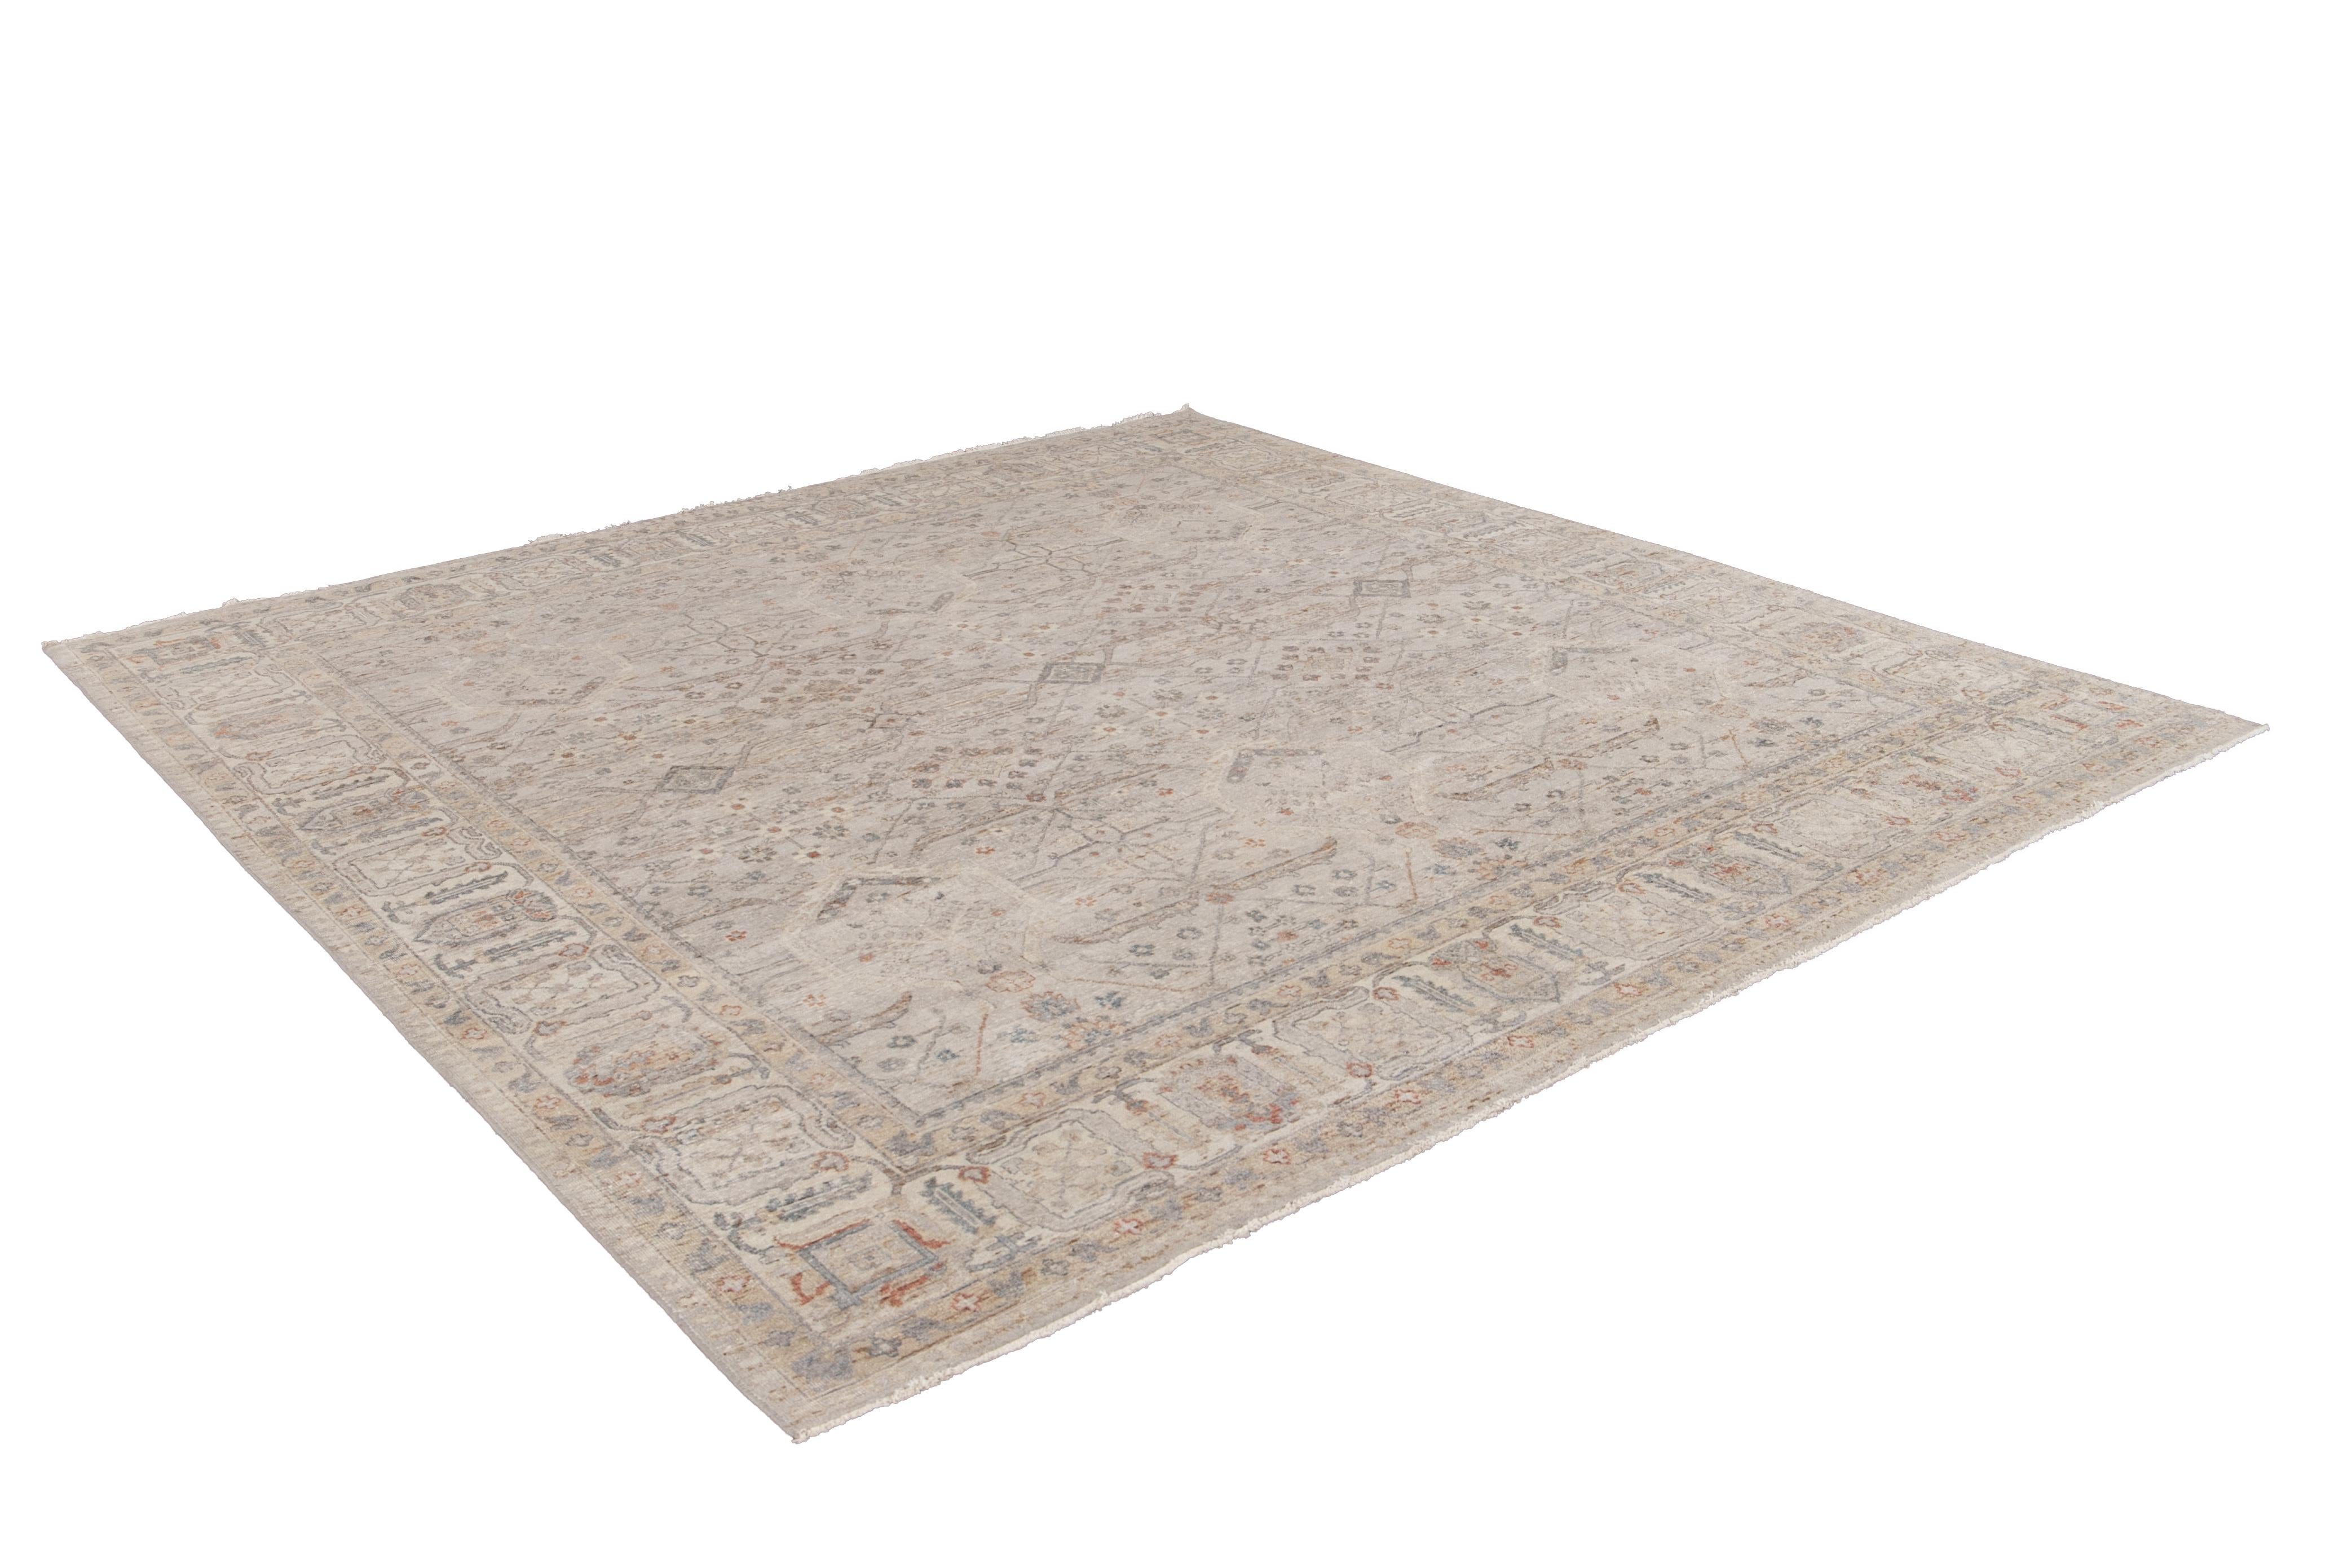 21st Century Contemporary Indian Square Wool Rug 13